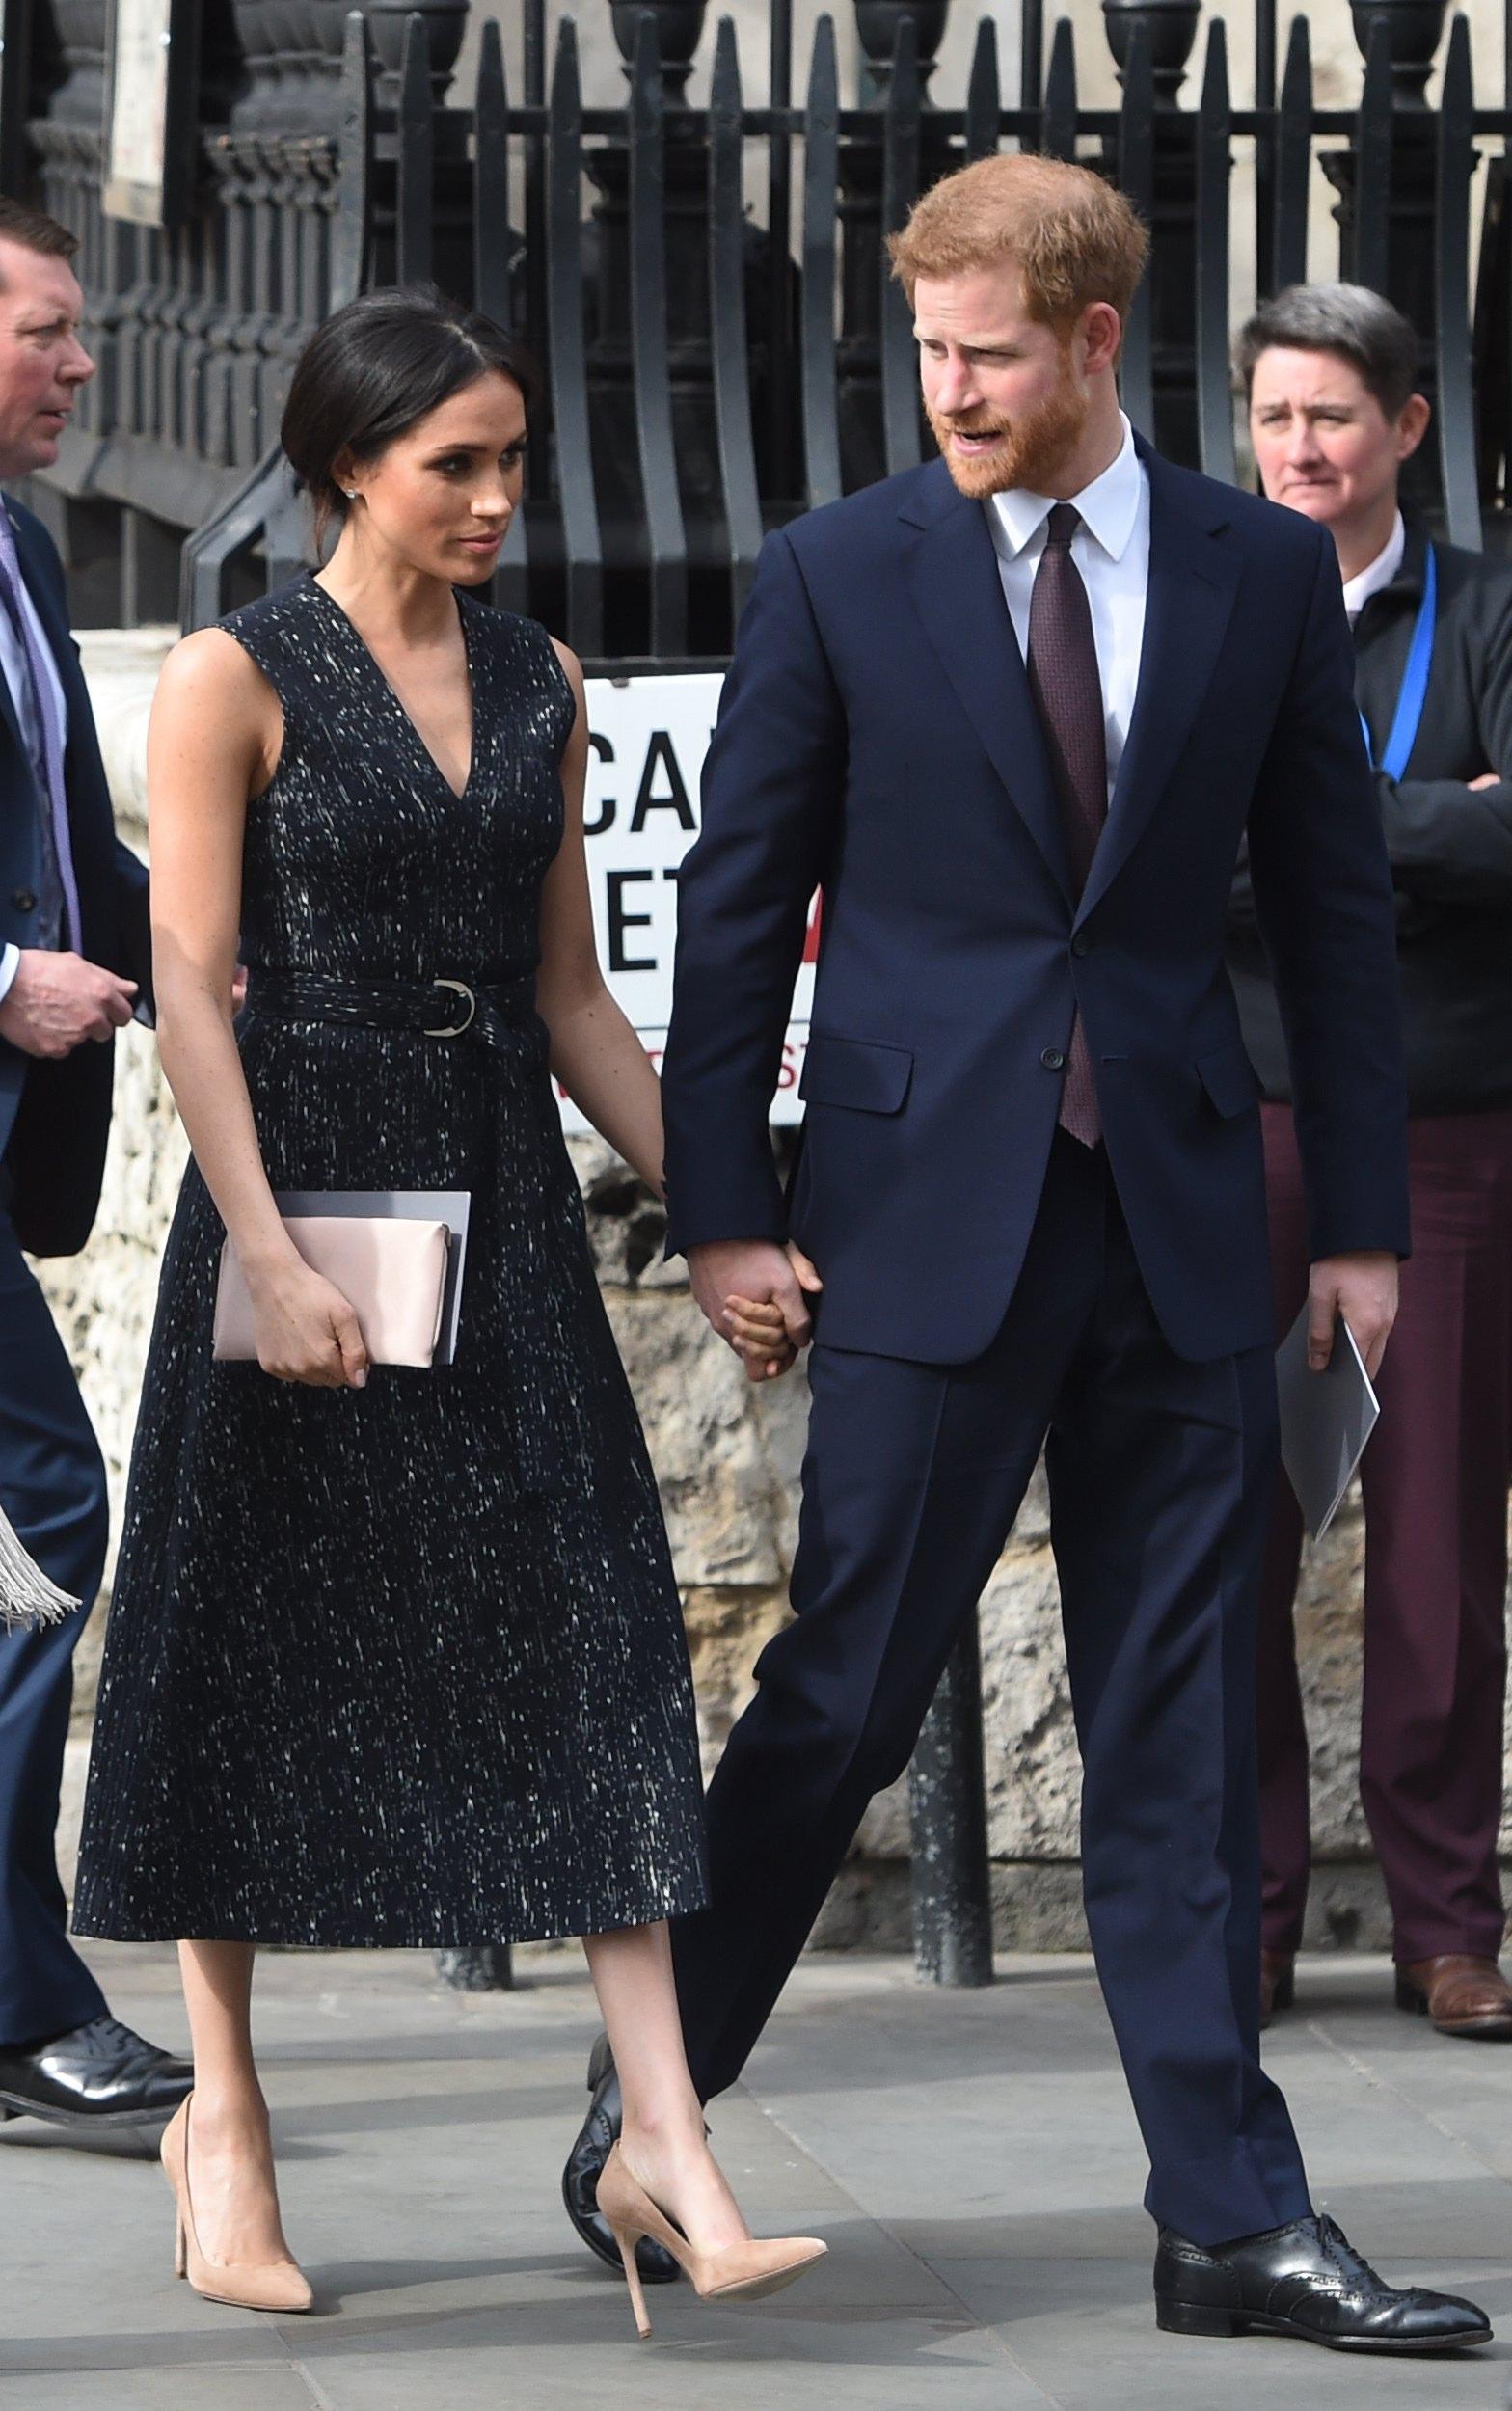 Prince Harry and Meghan Markle attend the Stephen Lawrence memorial in London